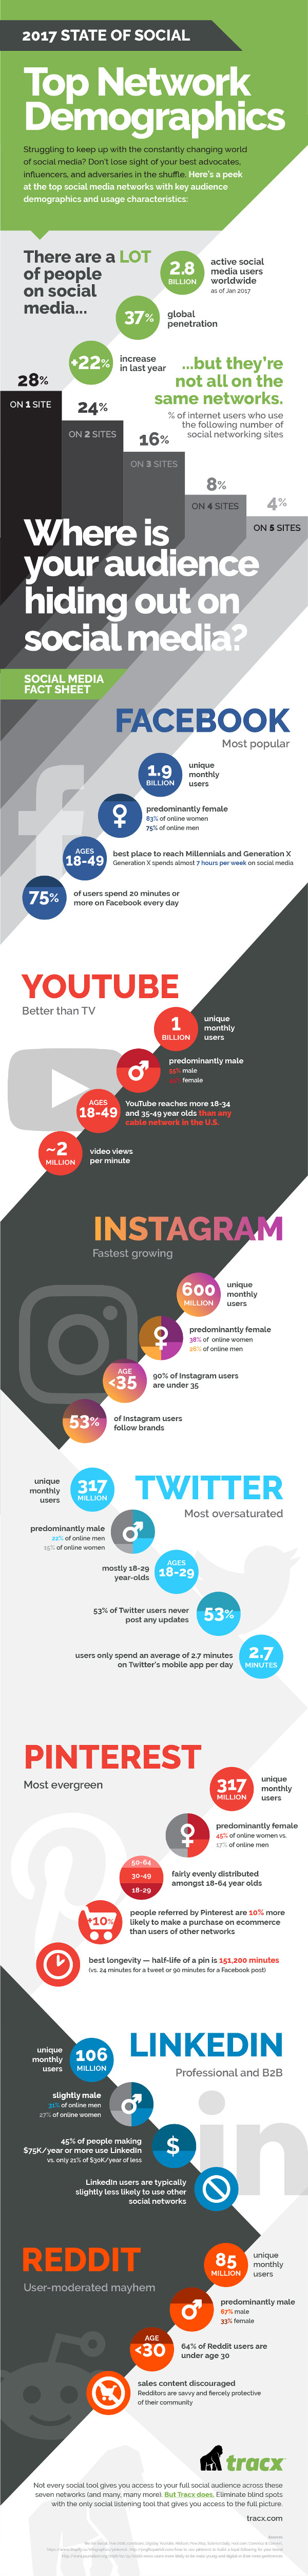 Infographic Top Social Networks by demographics